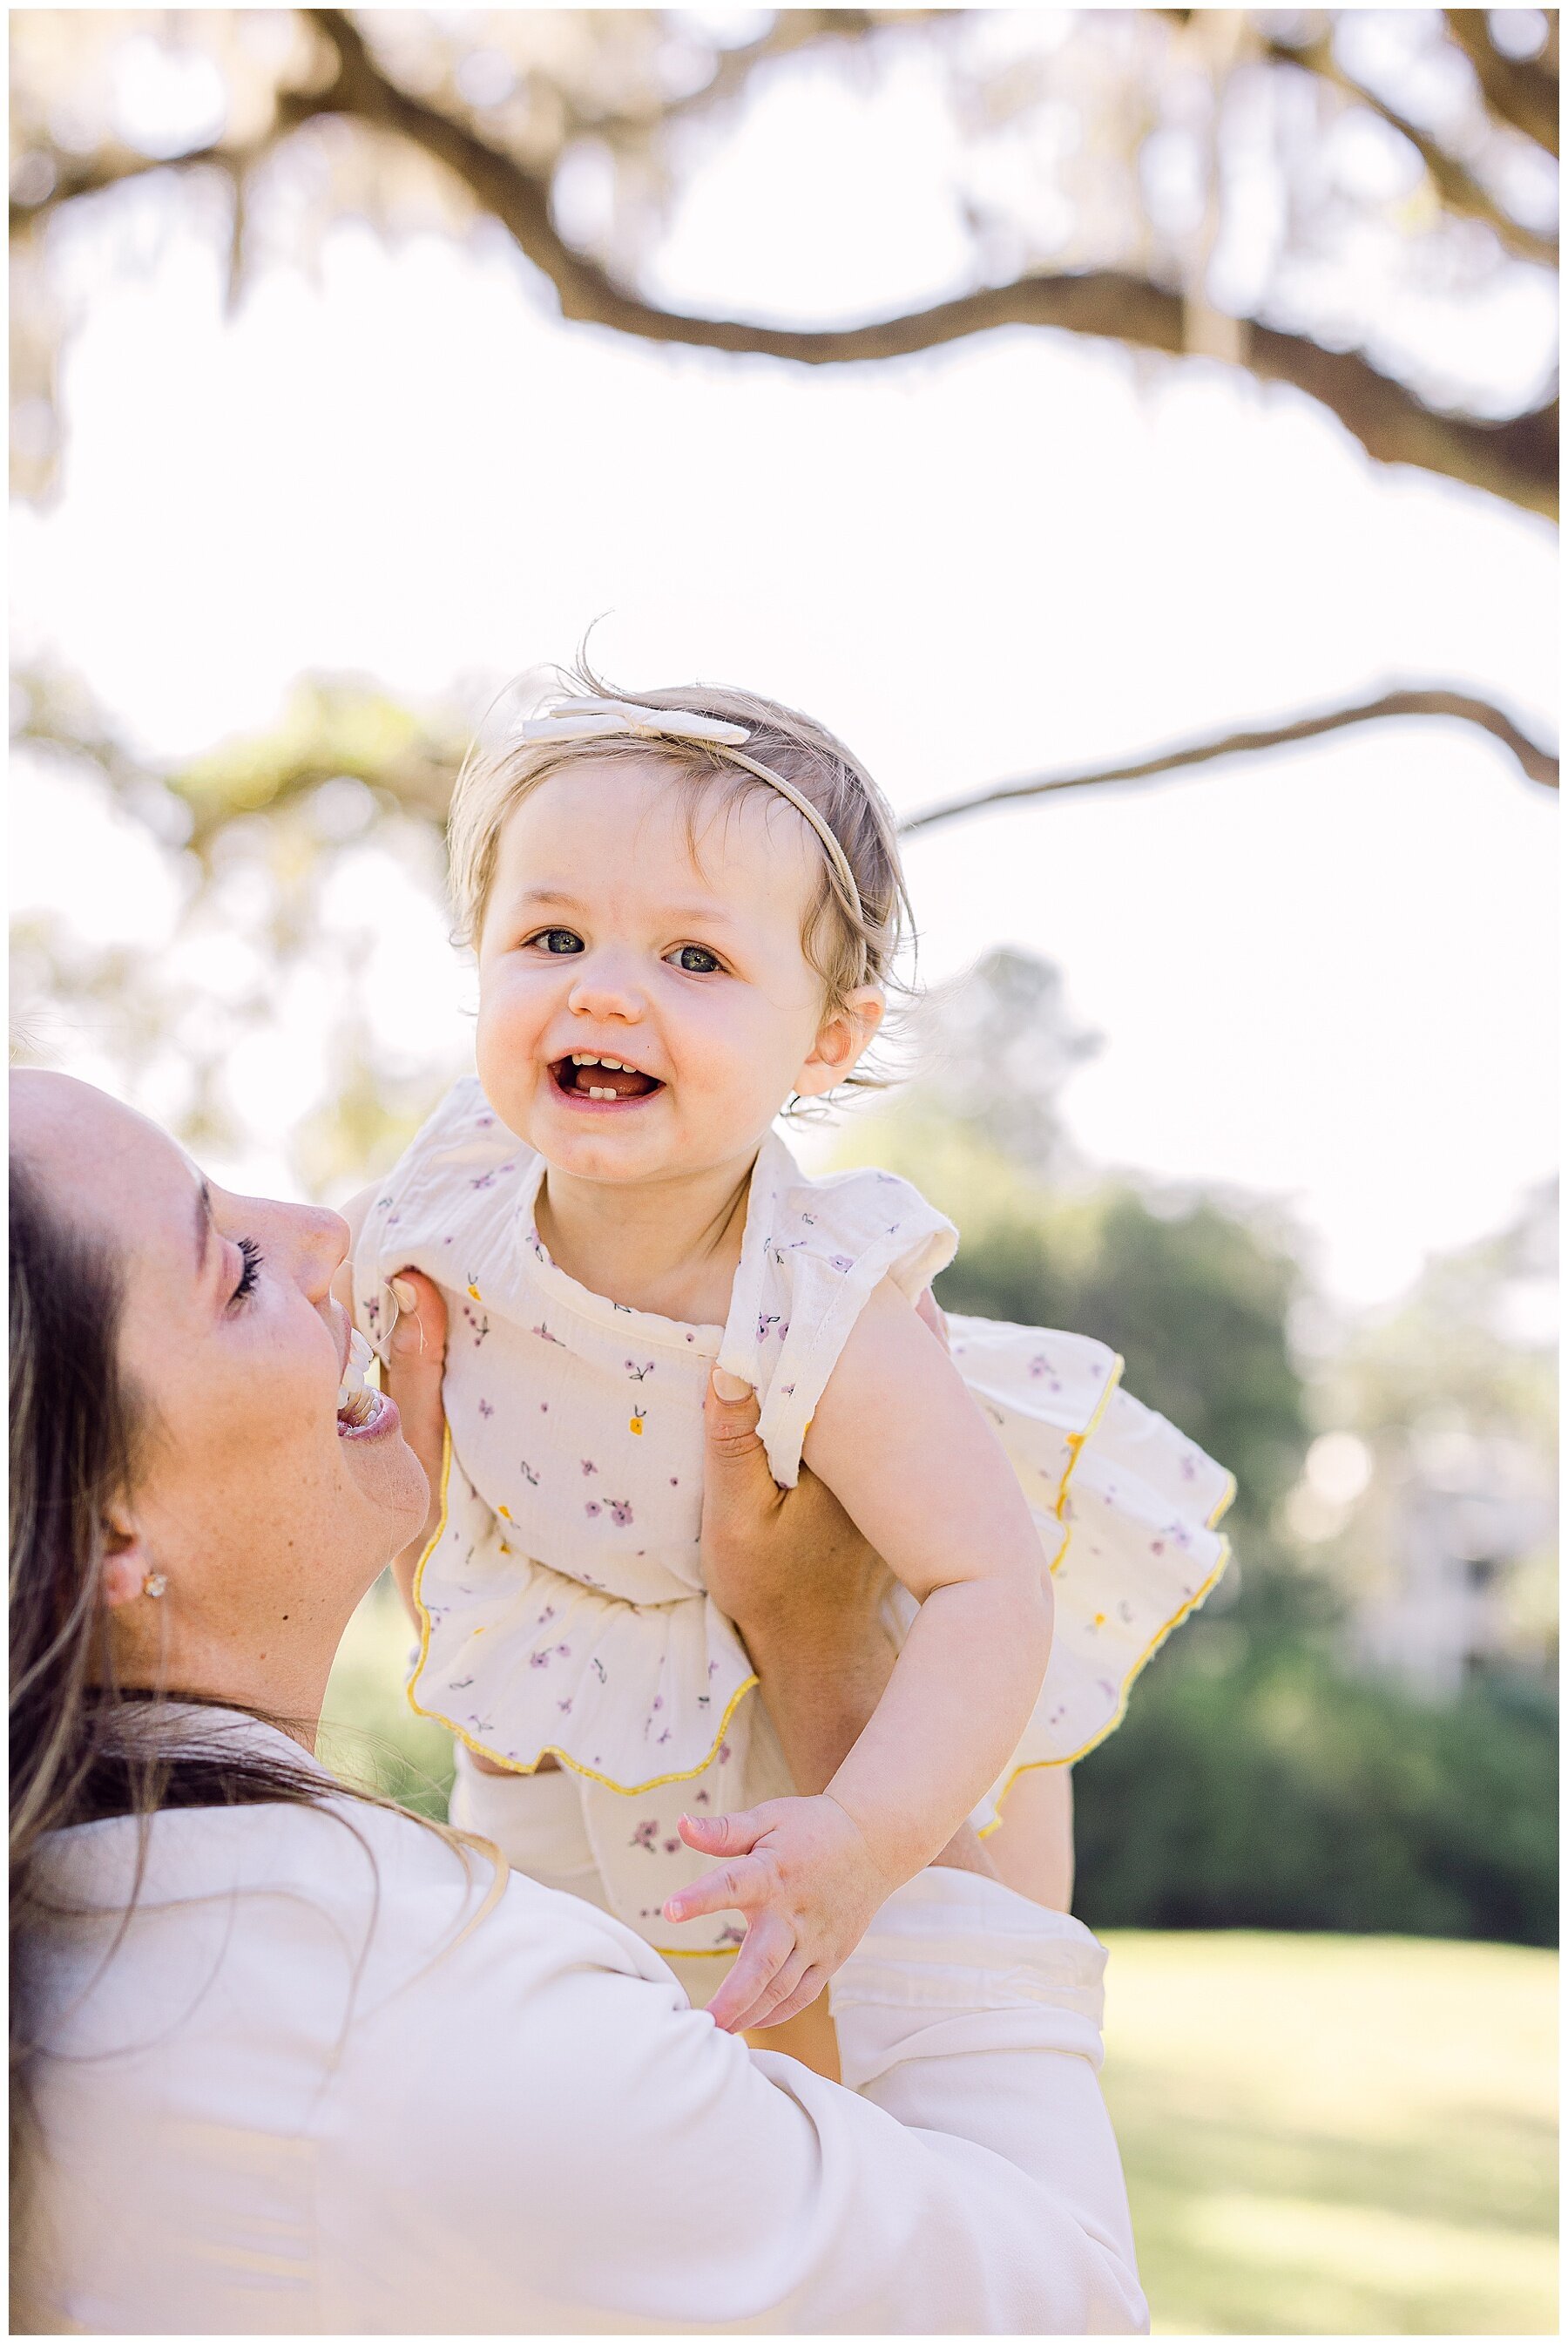 Katherine_Ives_Photography_Sallah_Palmetto_Bluff_Family_Session_27.JPG